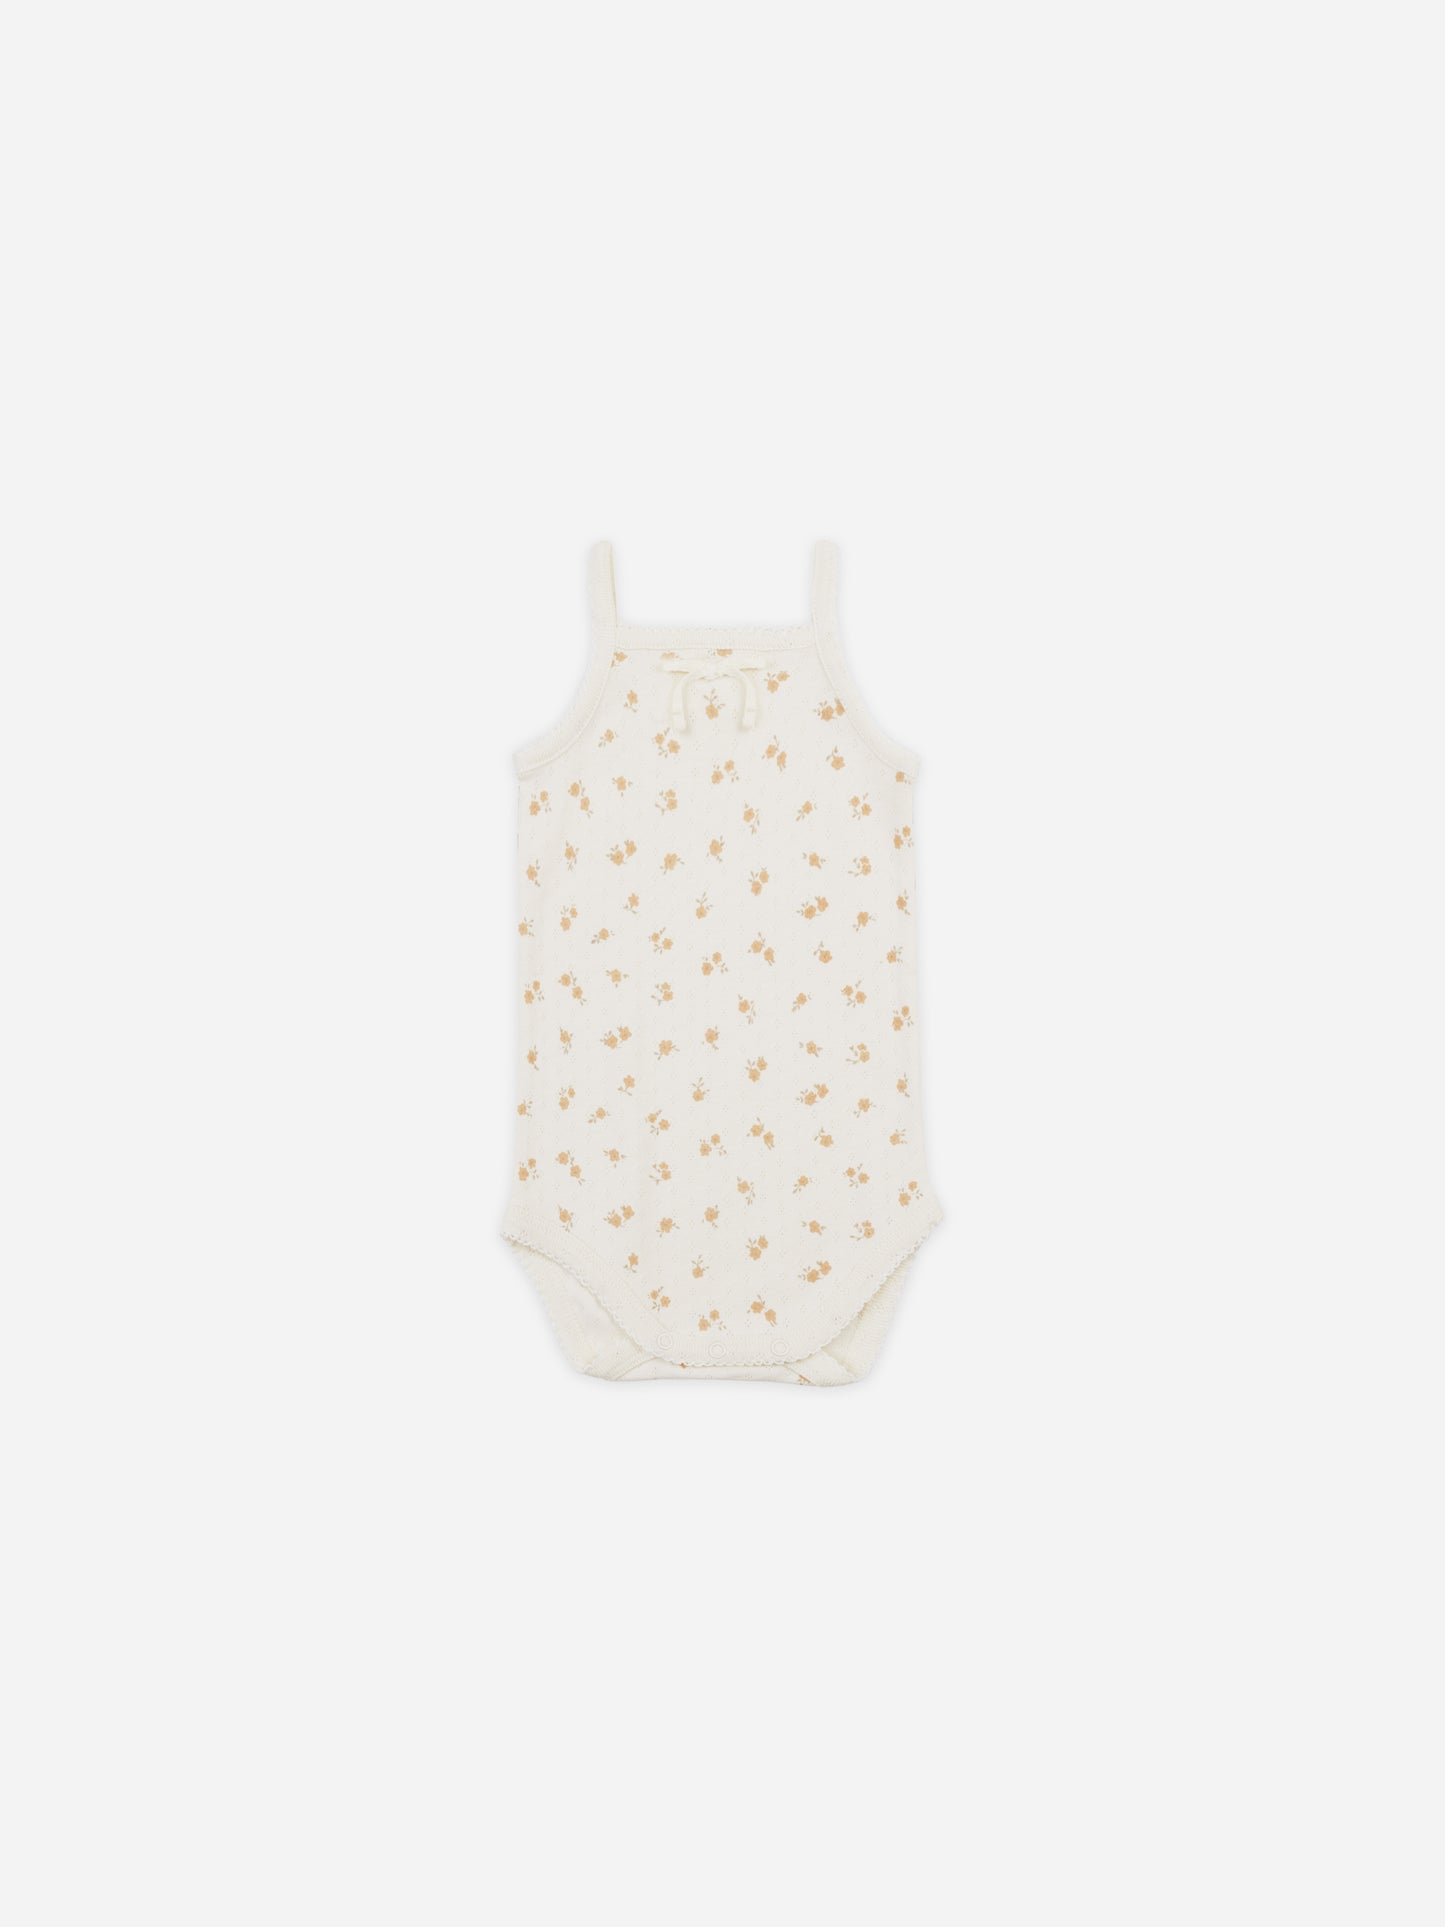 Pointelle Tank Bodysuit || Ditsy Melon - Rylee + Cru | Kids Clothes | Trendy Baby Clothes | Modern Infant Outfits |